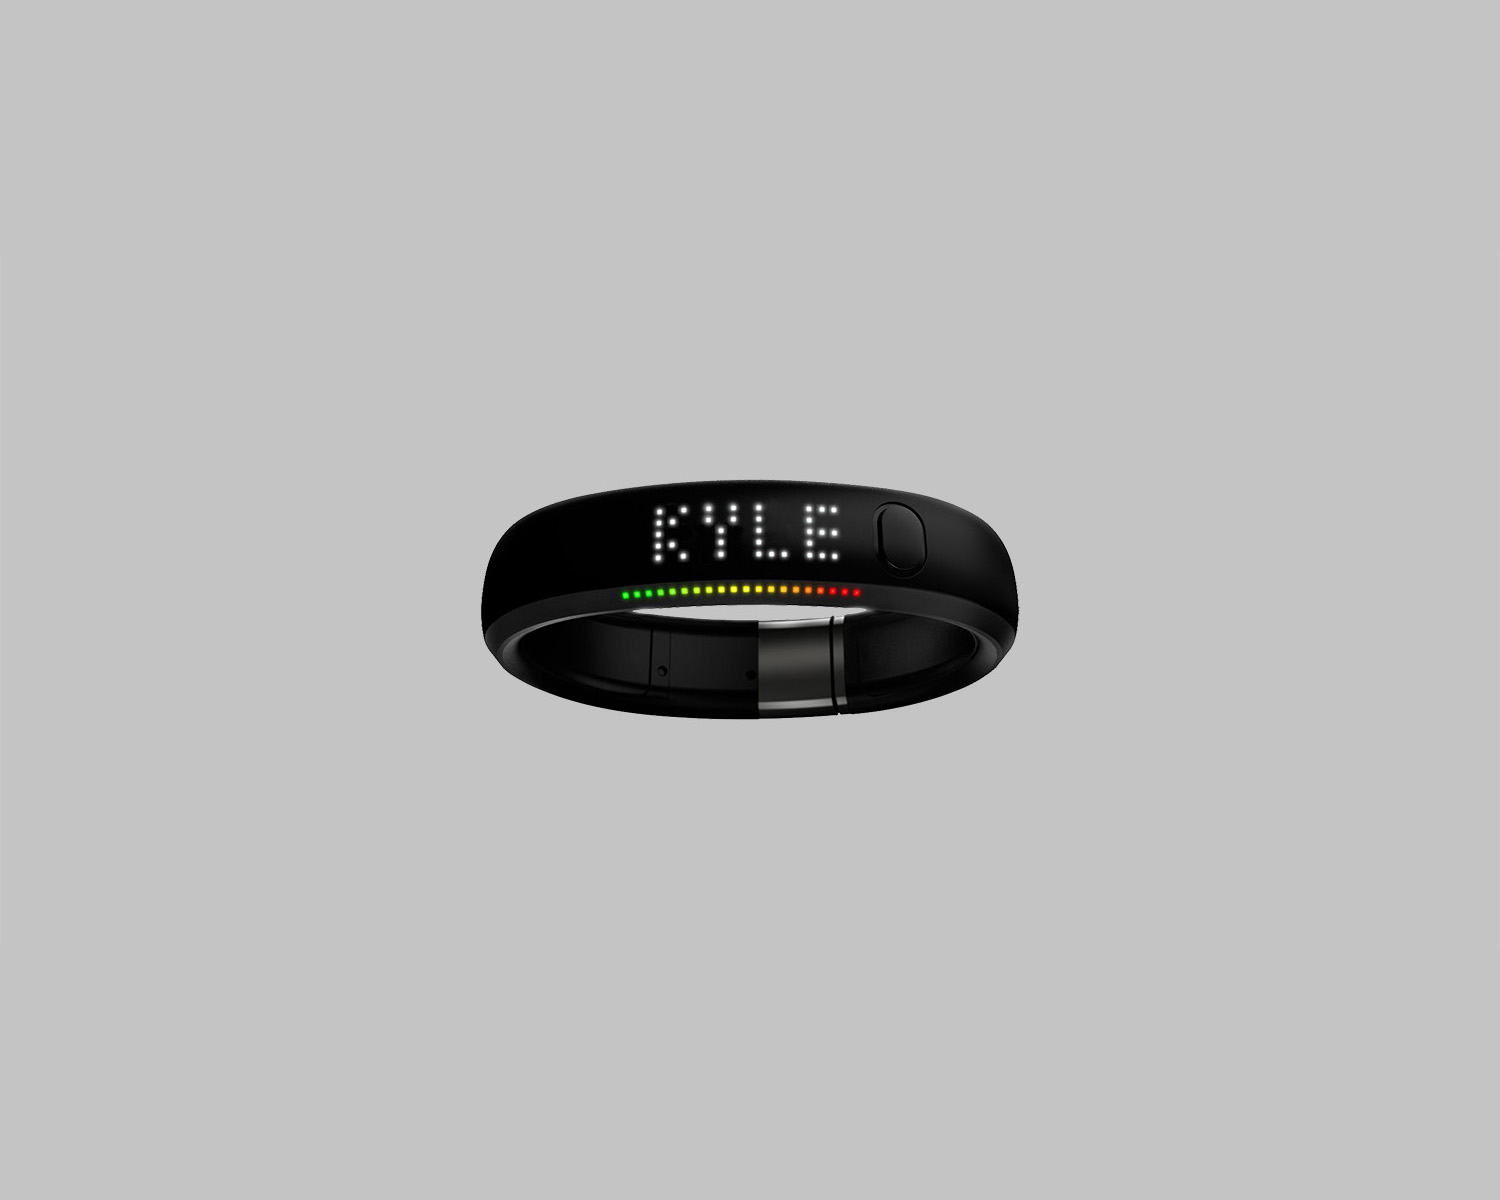 Nike FuelBand watch with the word Kyle on its display